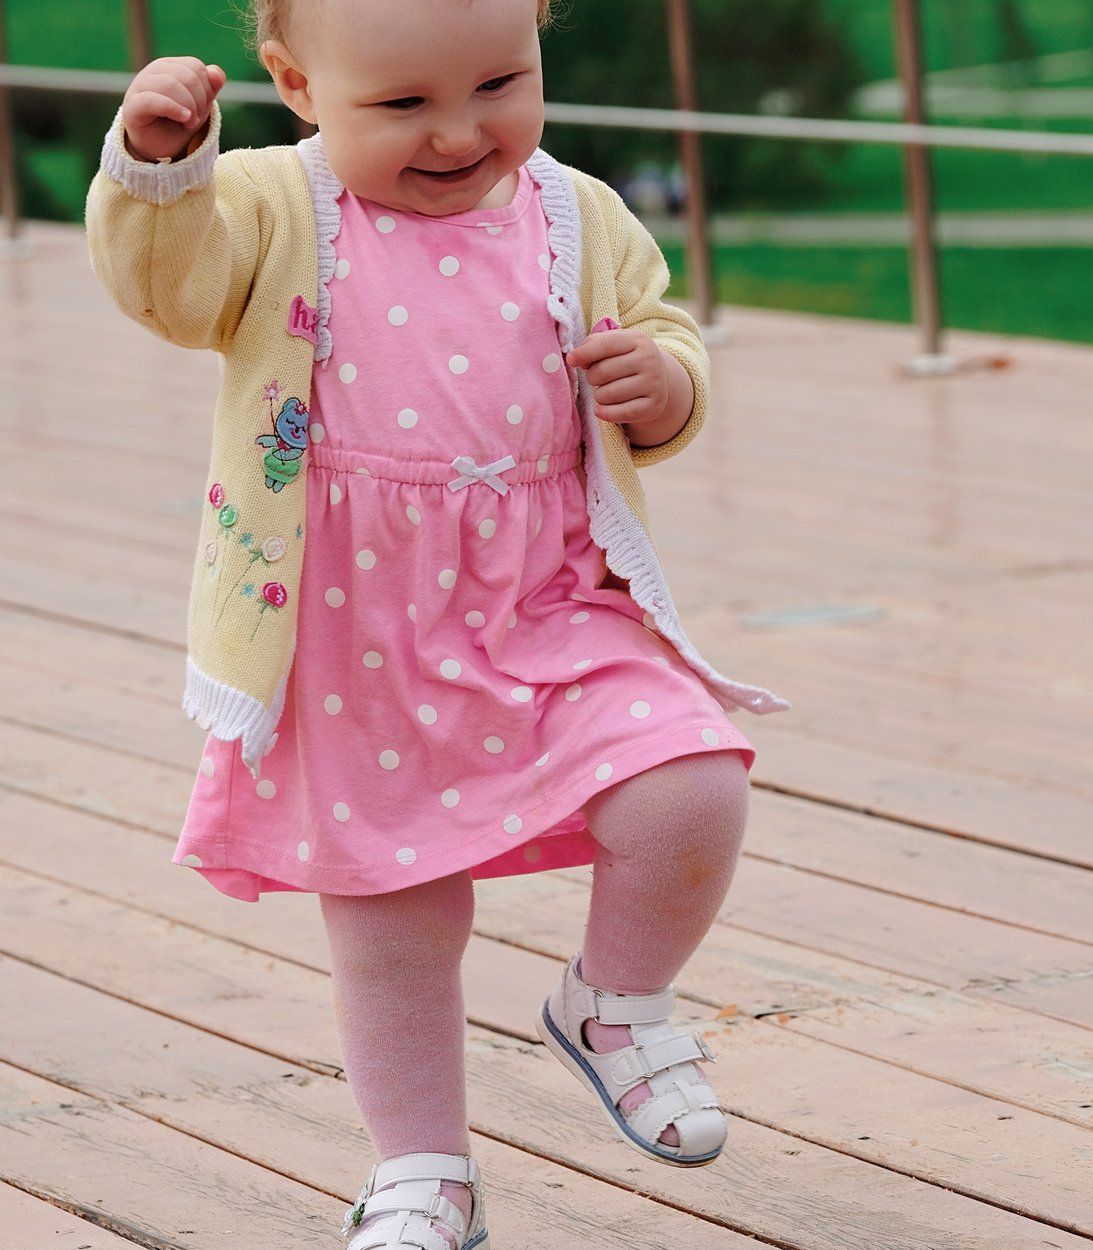 A Happy Child Dancing